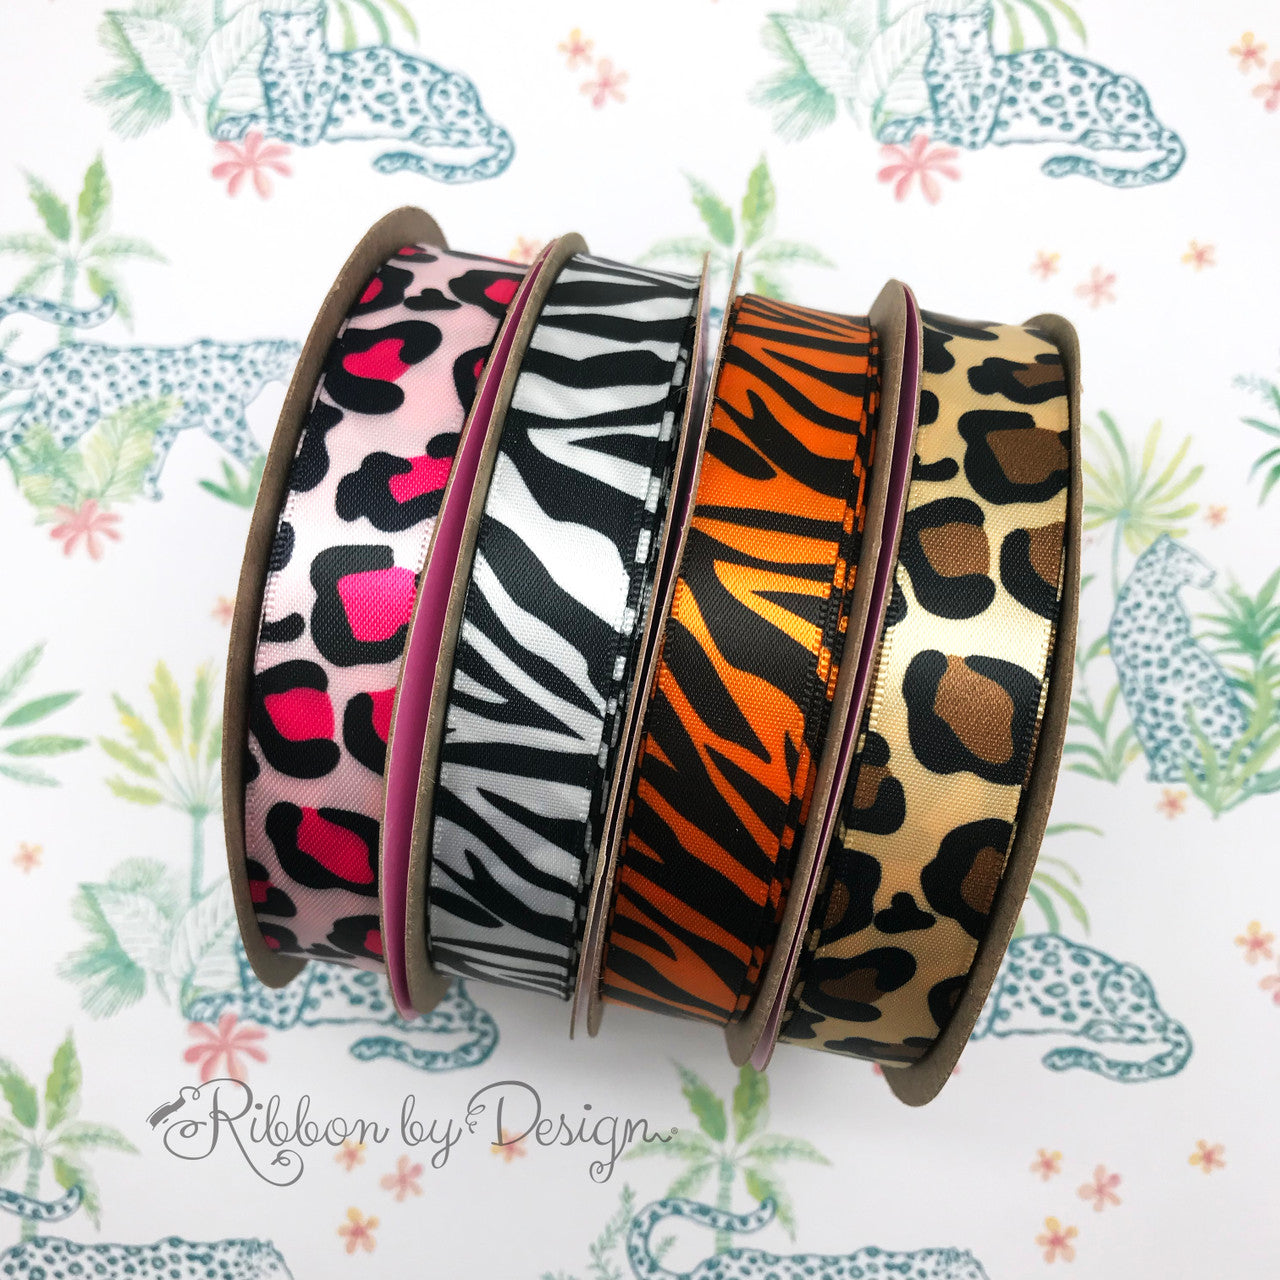 Mix and match our entire collection of animal prints to round out your jungle party theme ribbons!